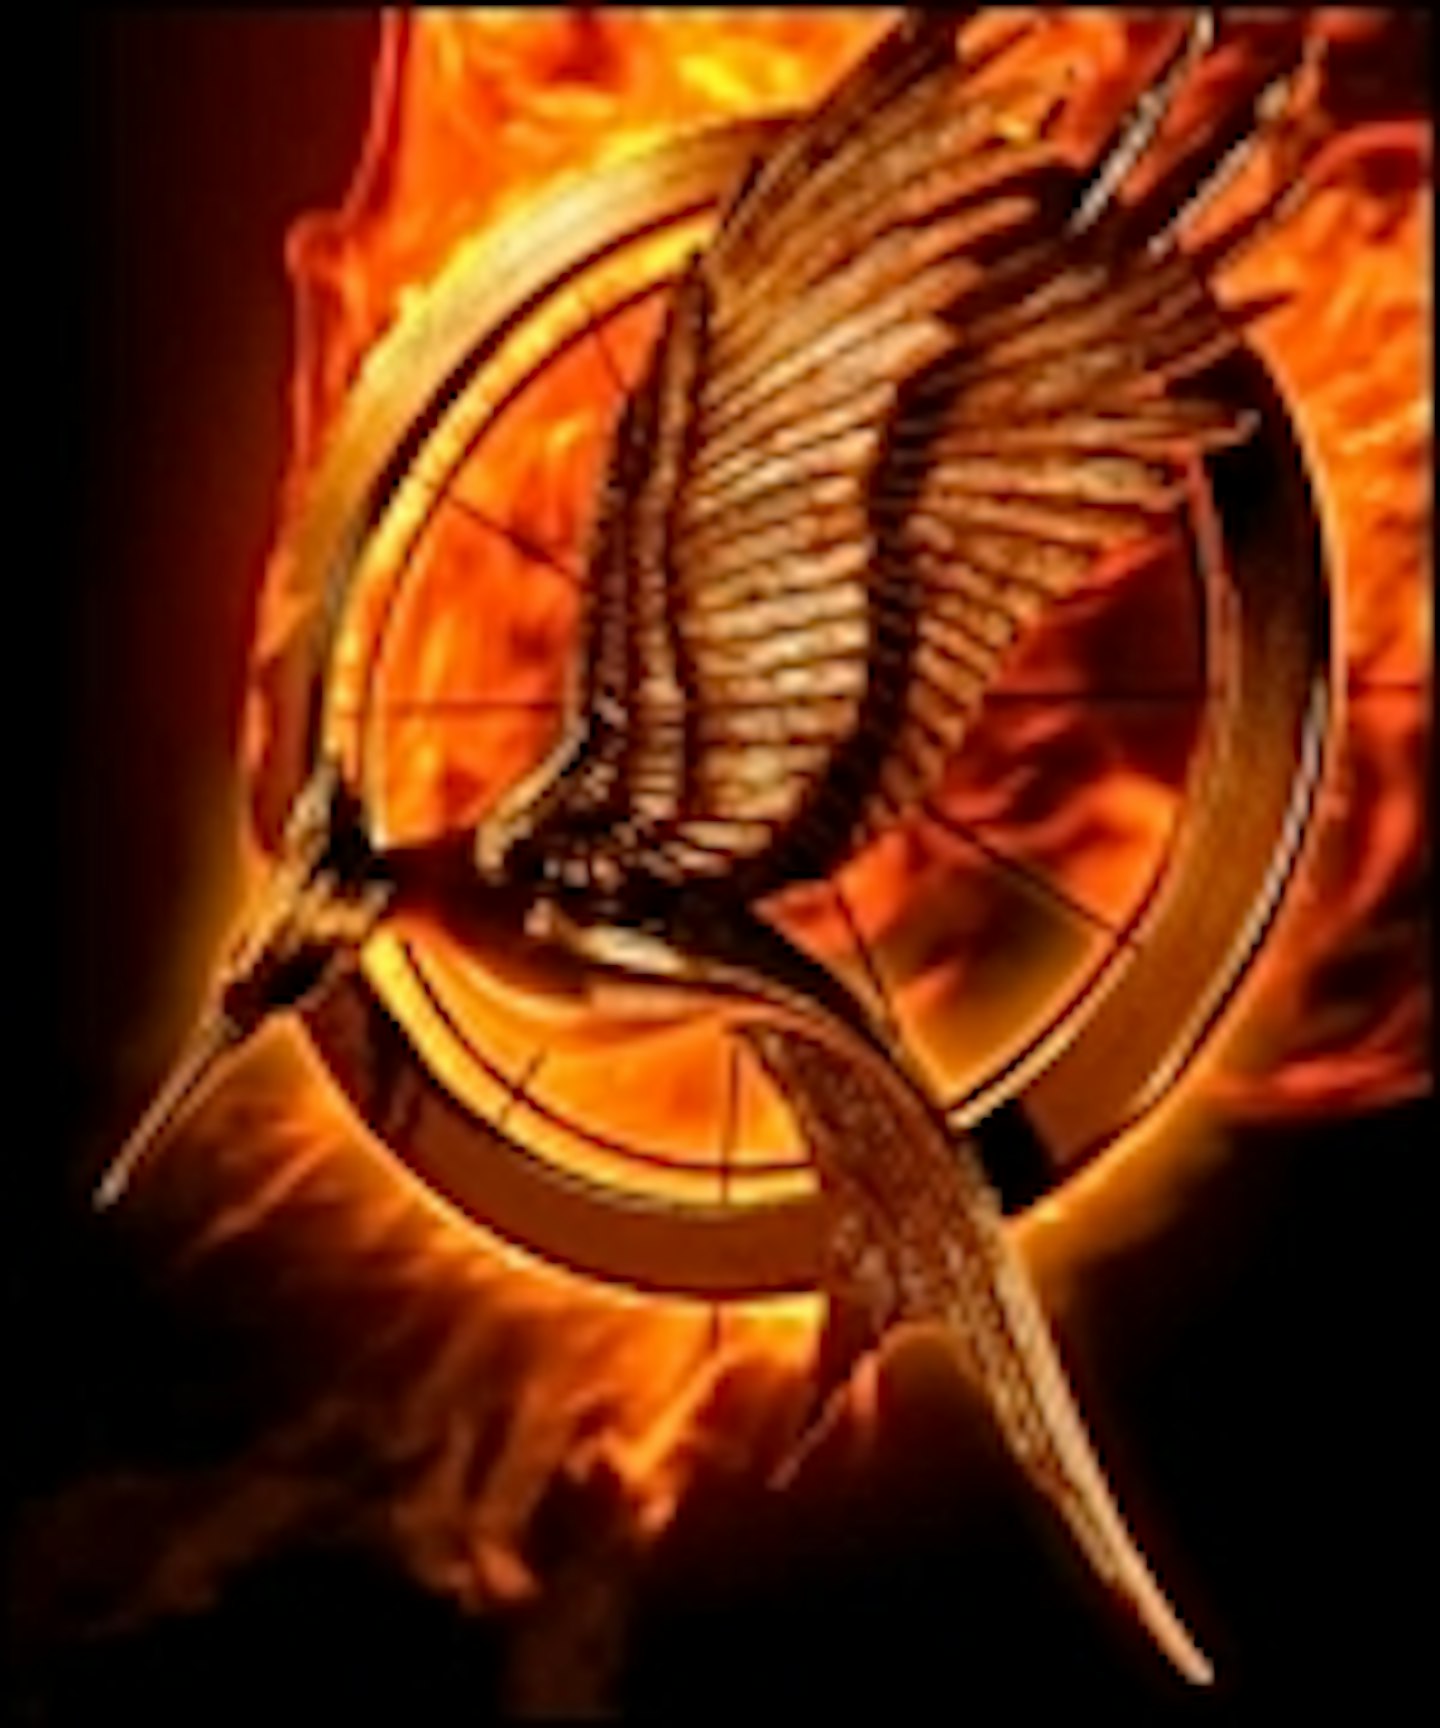 Catching Fire Motion Poster Online